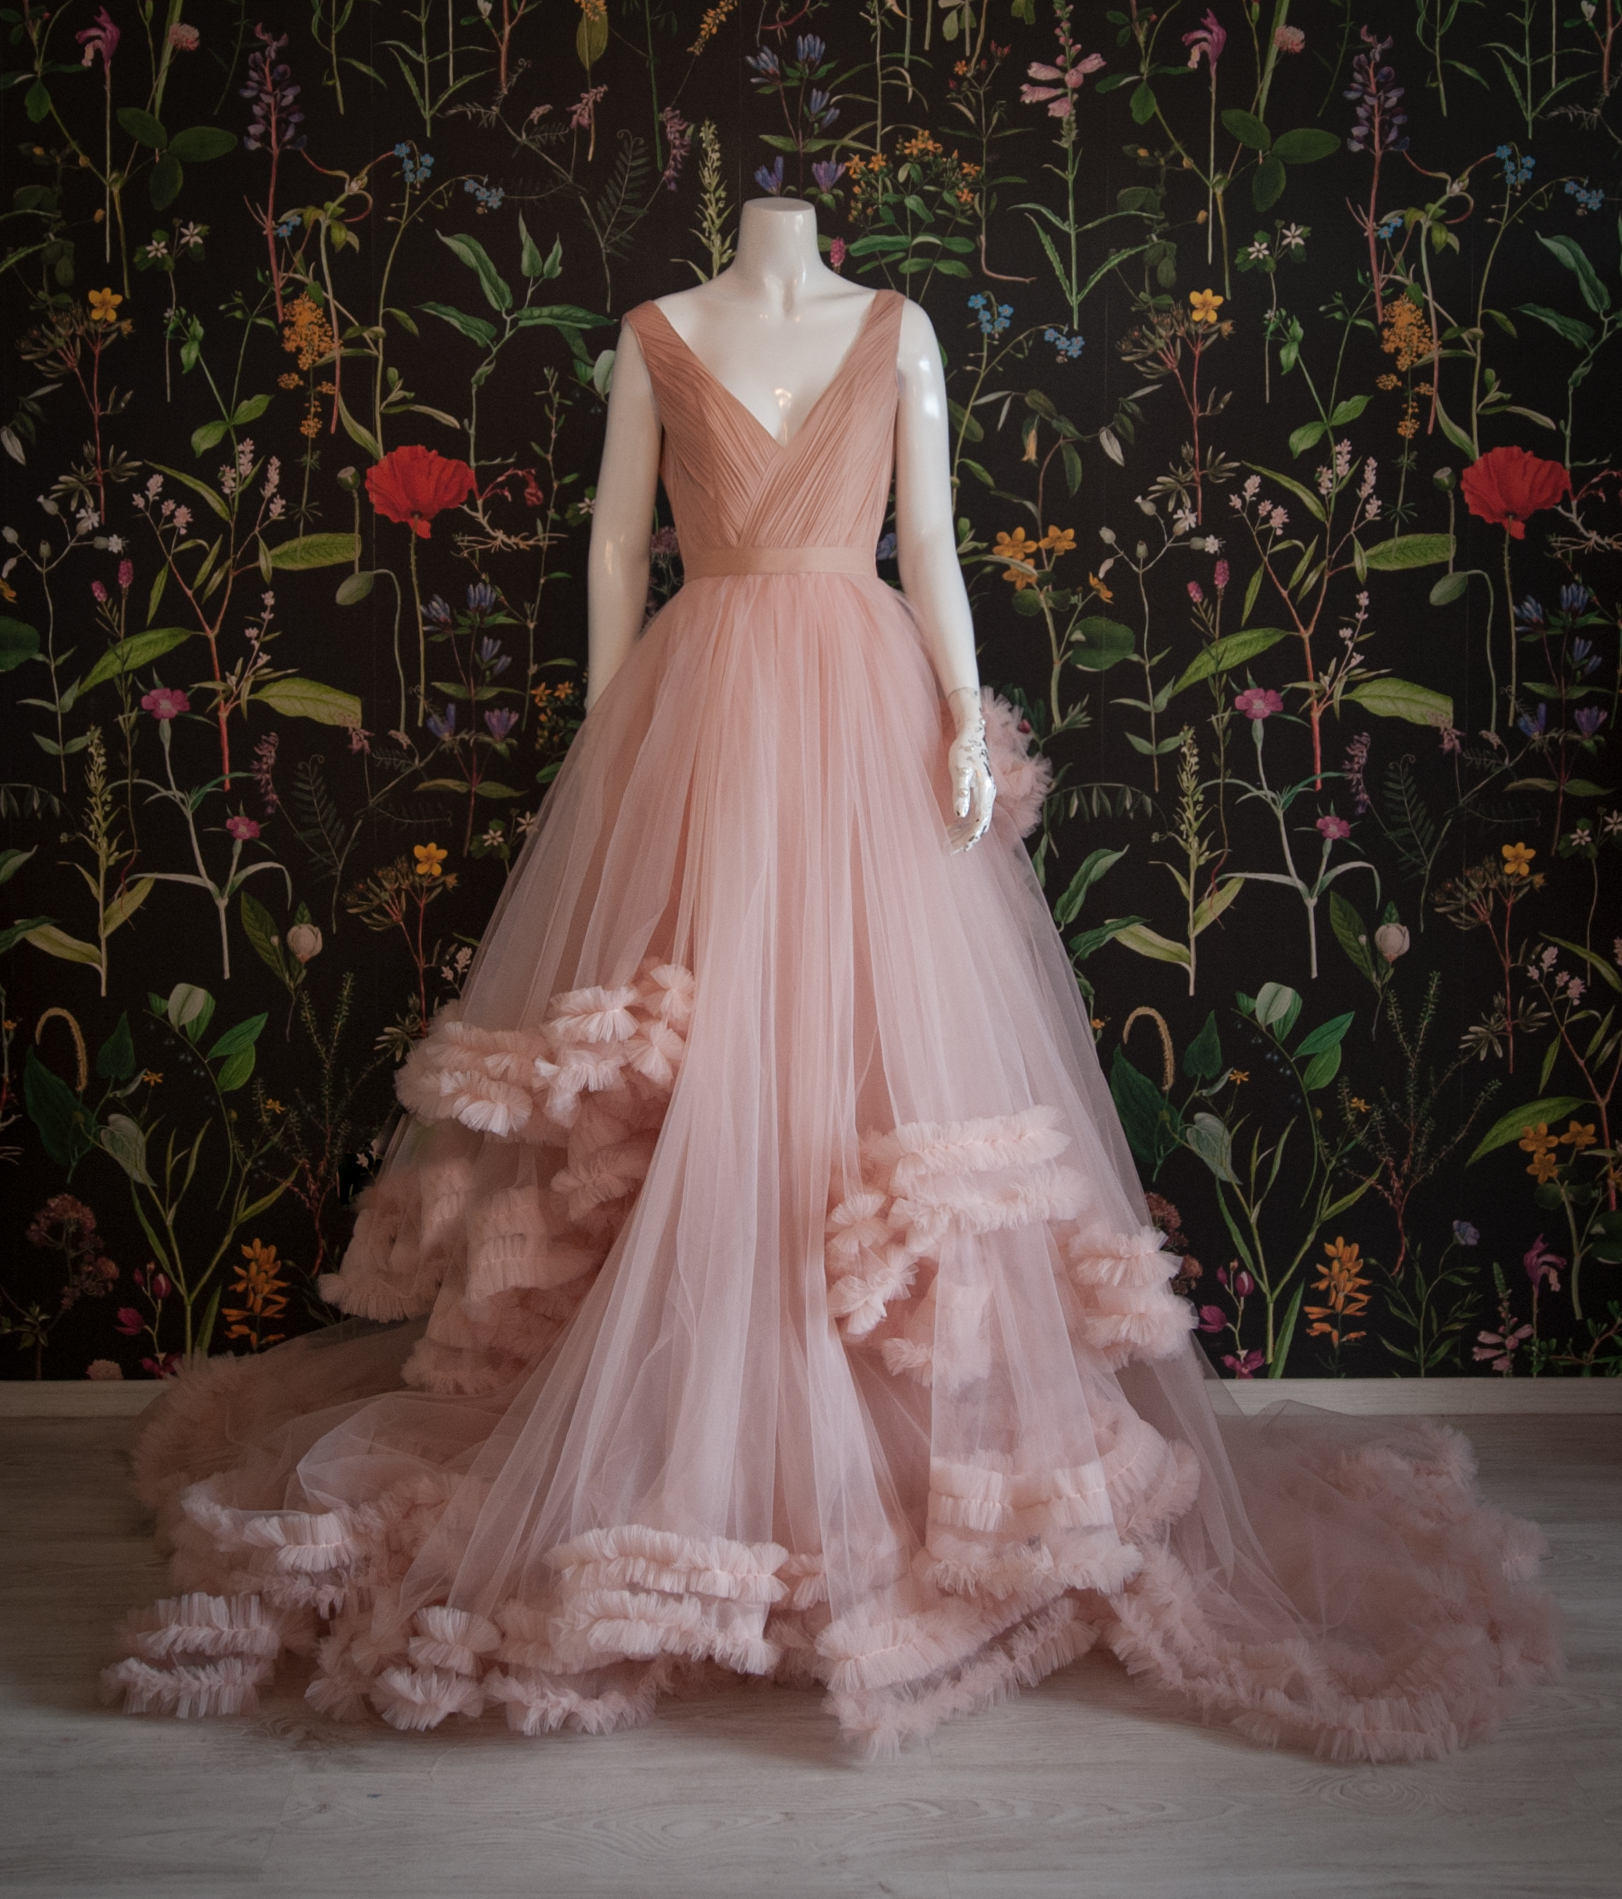 A dress with lots of tulle in a dark pink shade